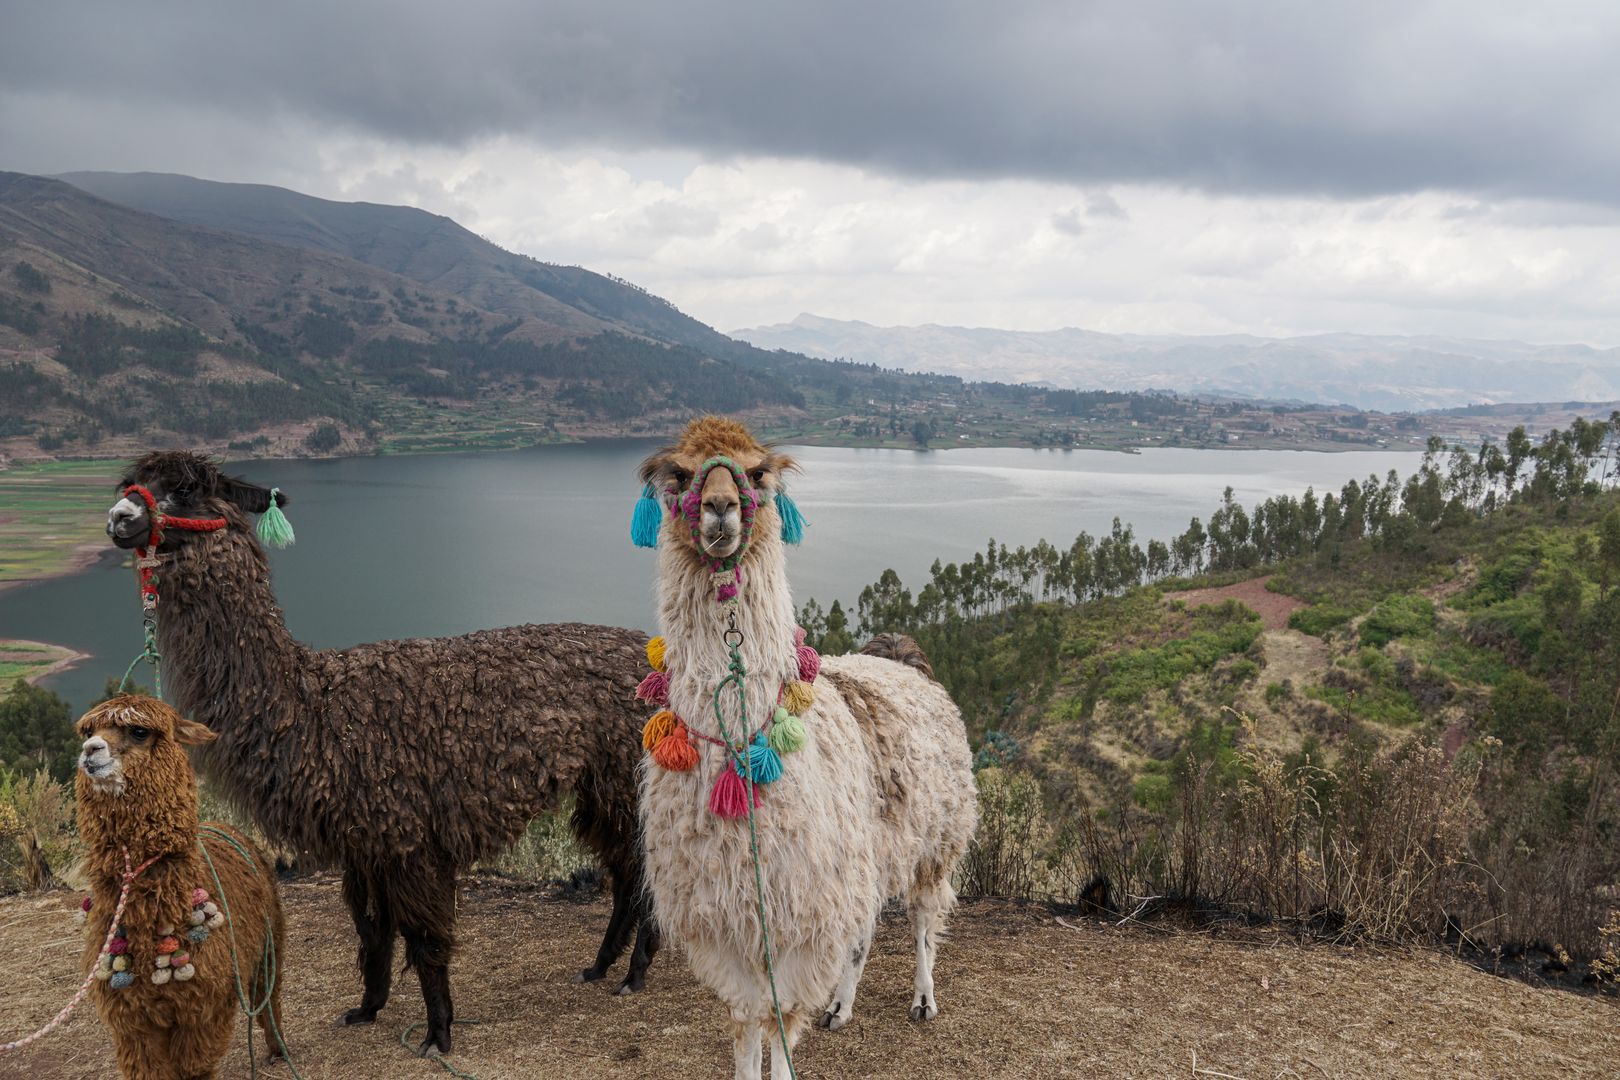 Three llamas standing on a hill overlooking a lake.